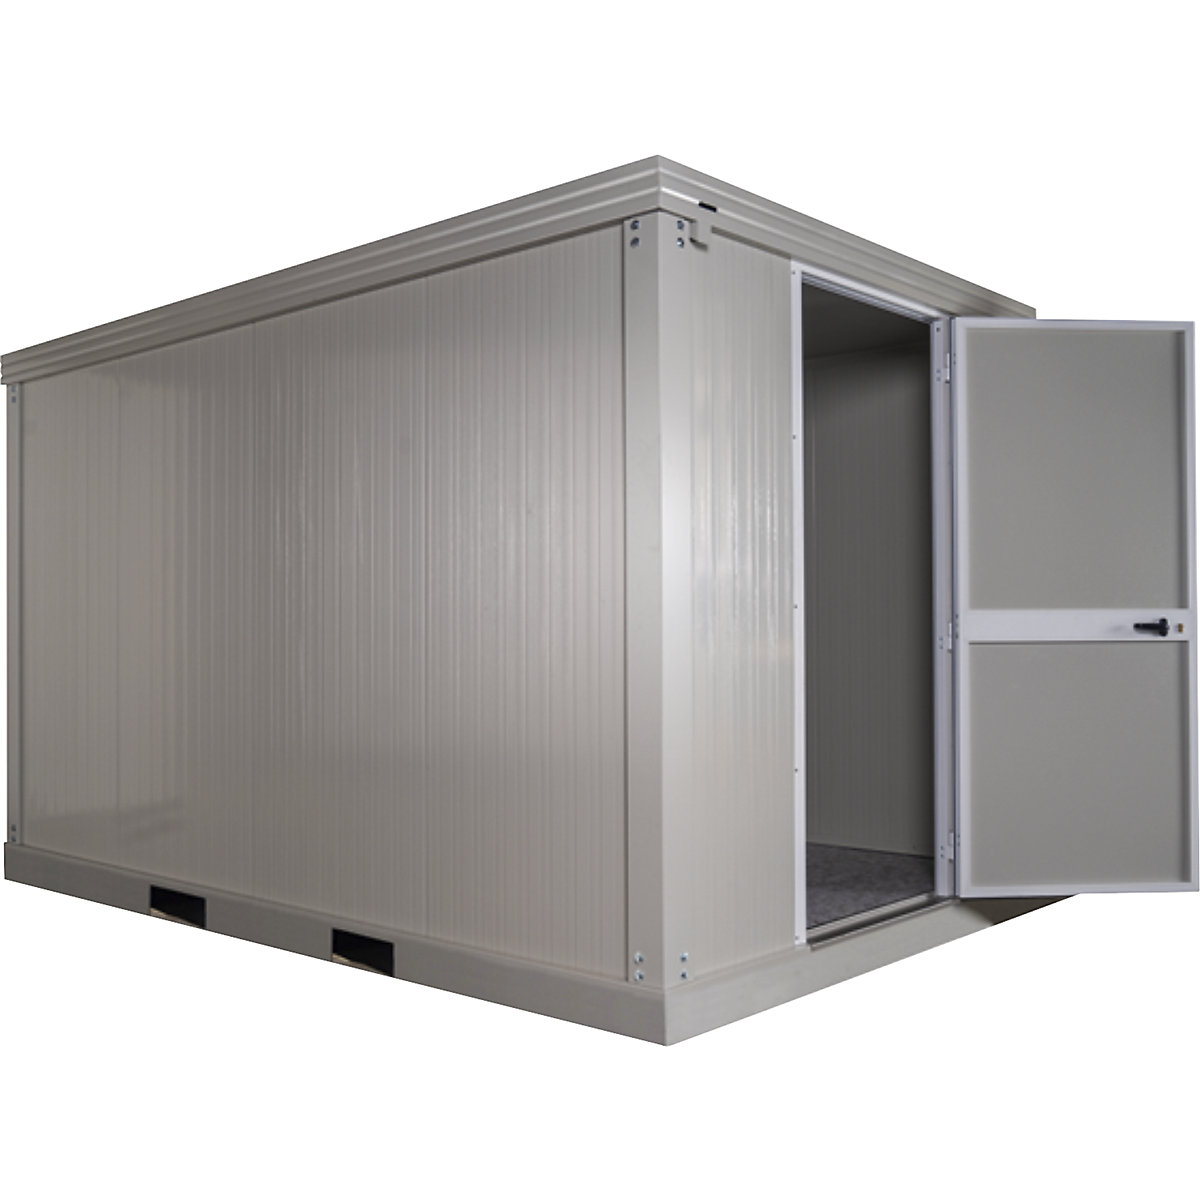 Isoleercontainer ThermoSafe TS+